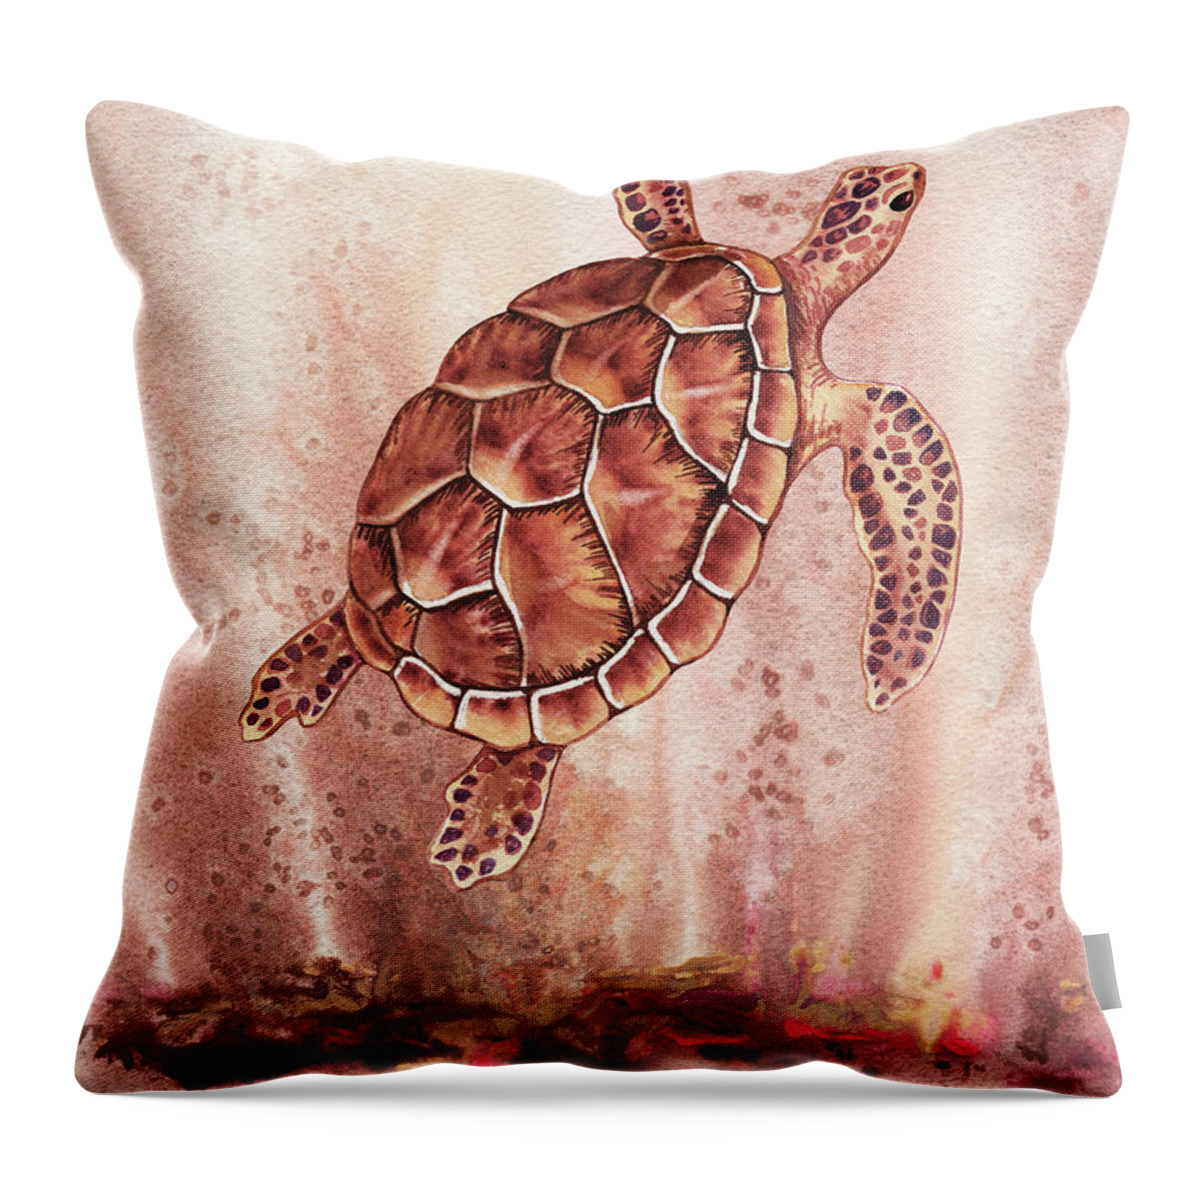 Giant Throw Pillow featuring the painting Swimming Free Under The Ocean Giant Sea Turtle Watercolor by Irina Sztukowski